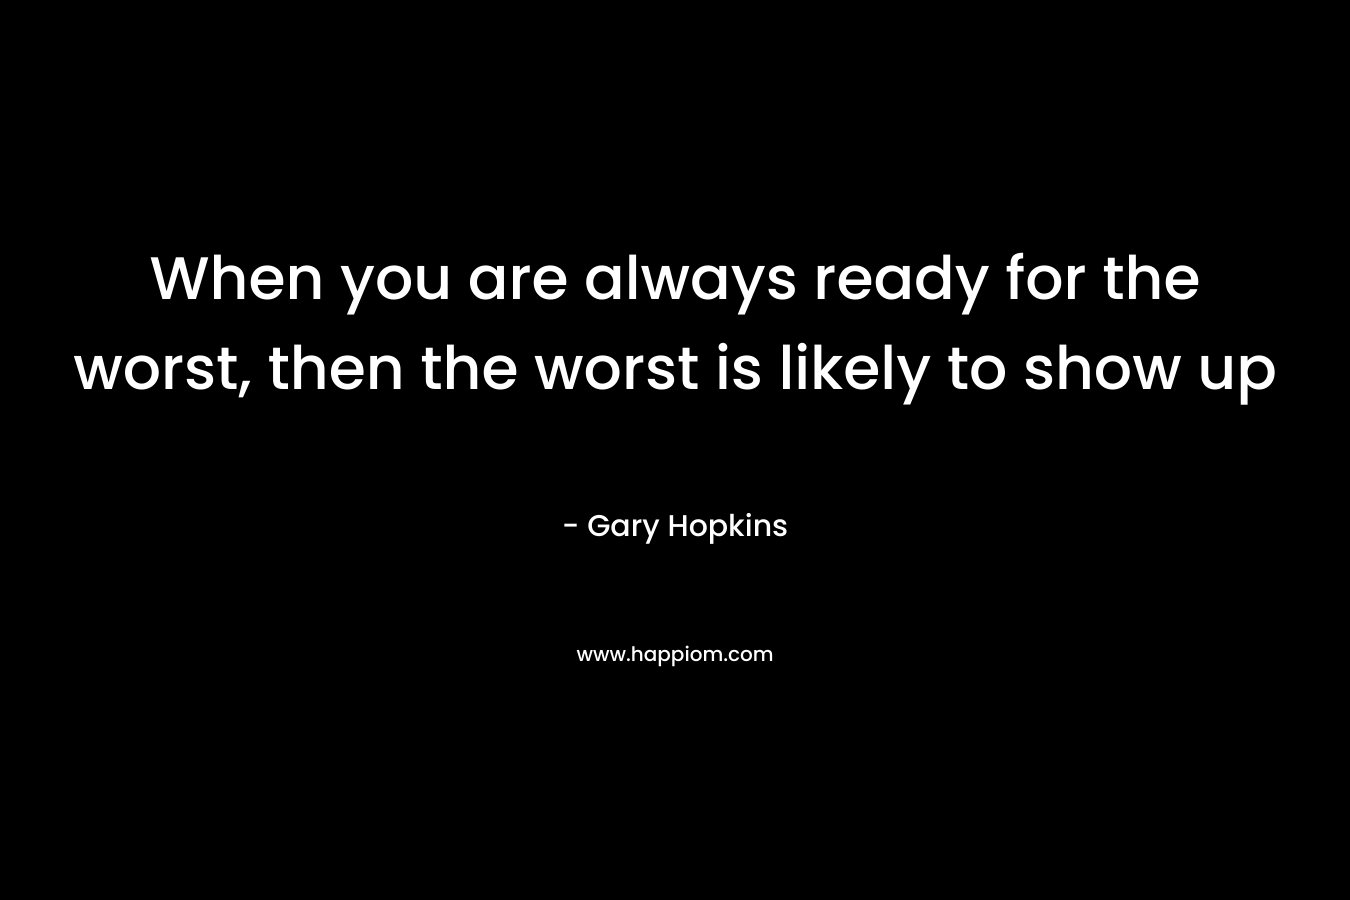 When you are always ready for the worst, then the worst is likely to show up